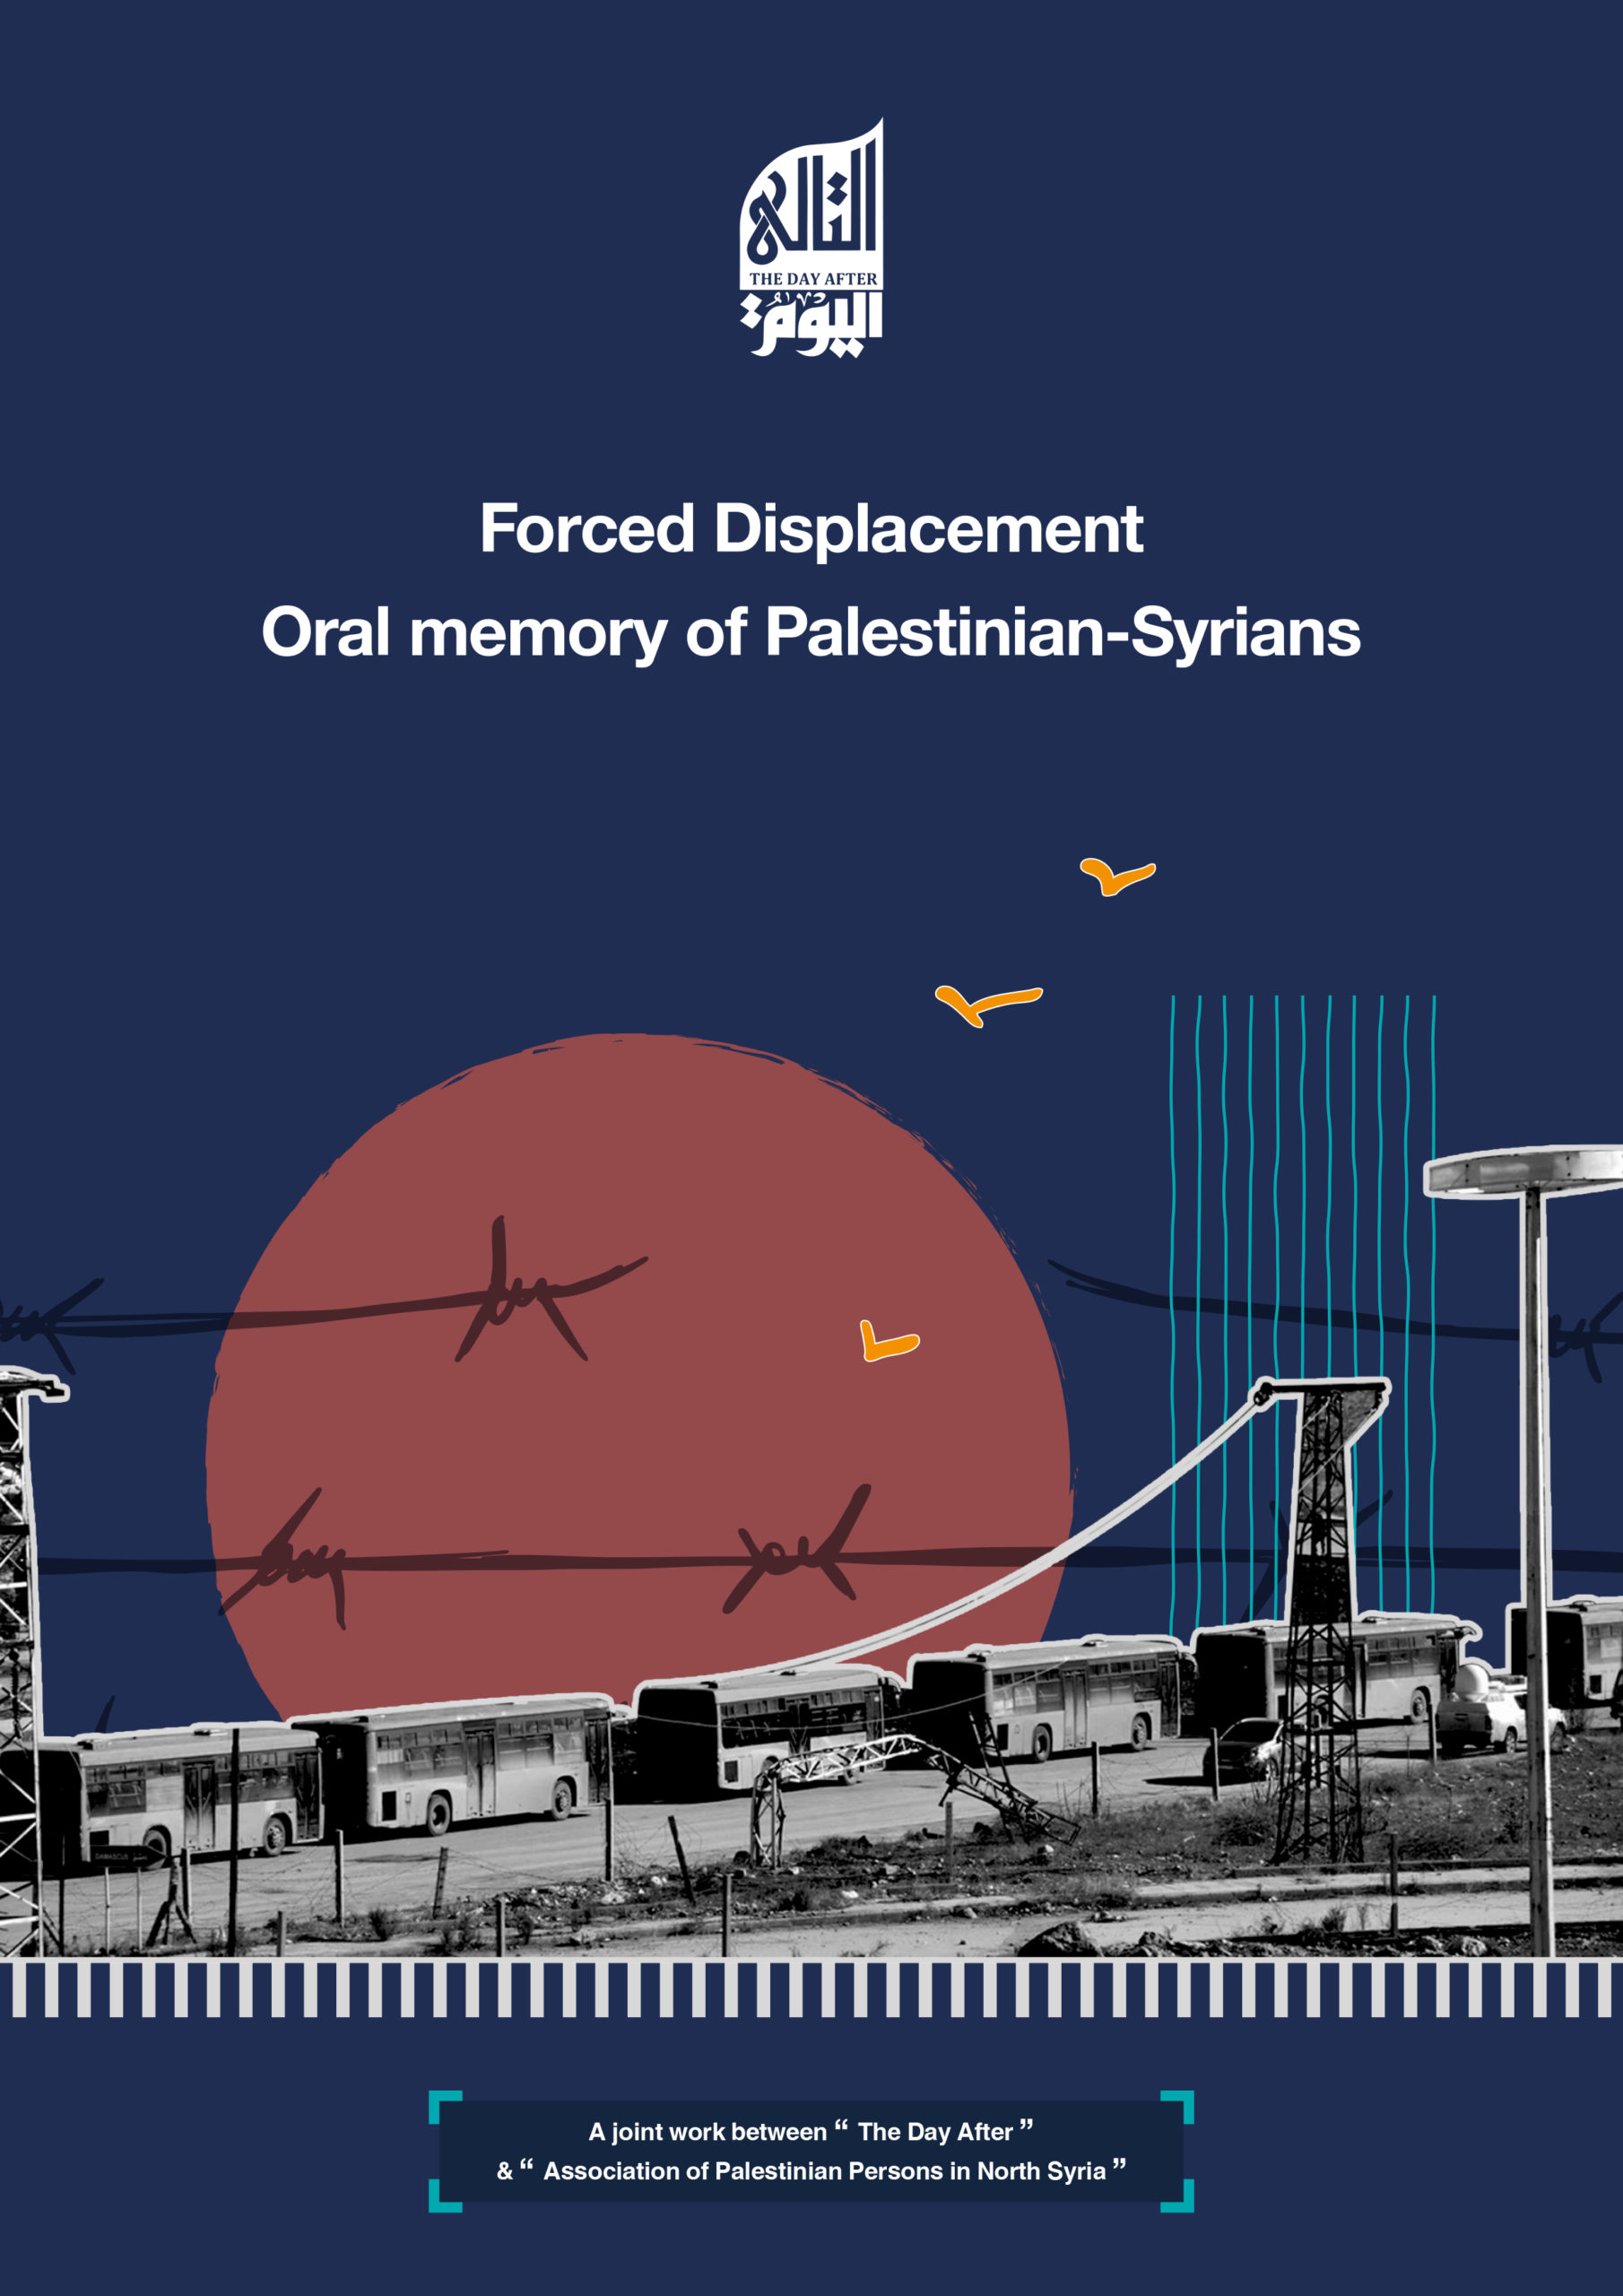 “Forced Displacement.. Oral memory of Palestinian-Syrians”